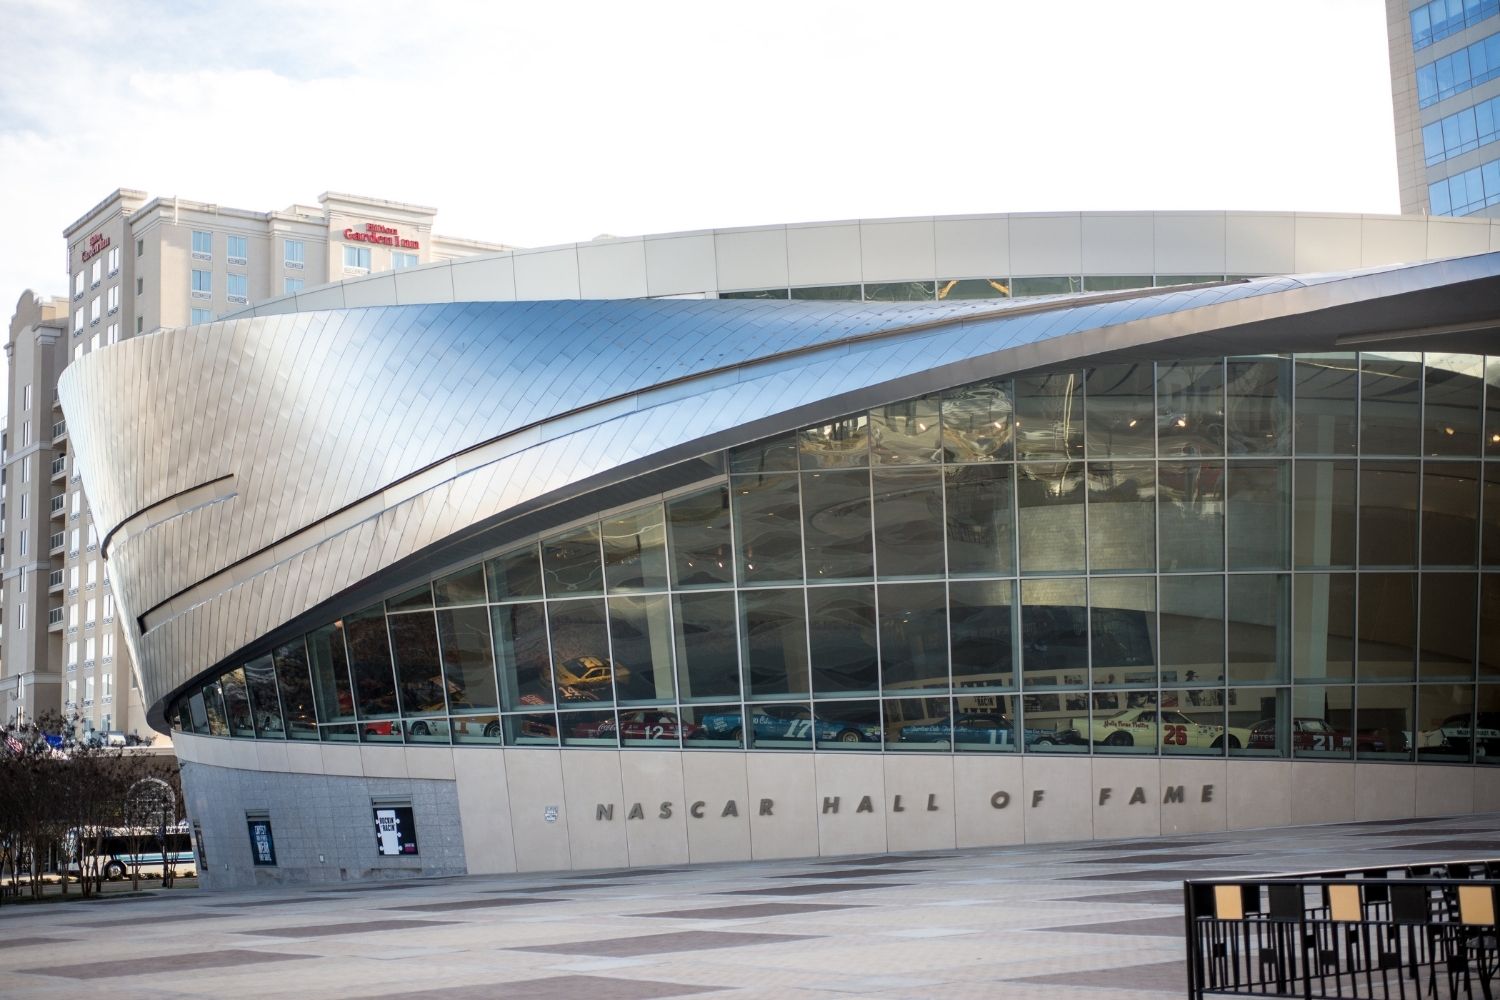 Nascar Hall of Fame Things To Do in Charlotte